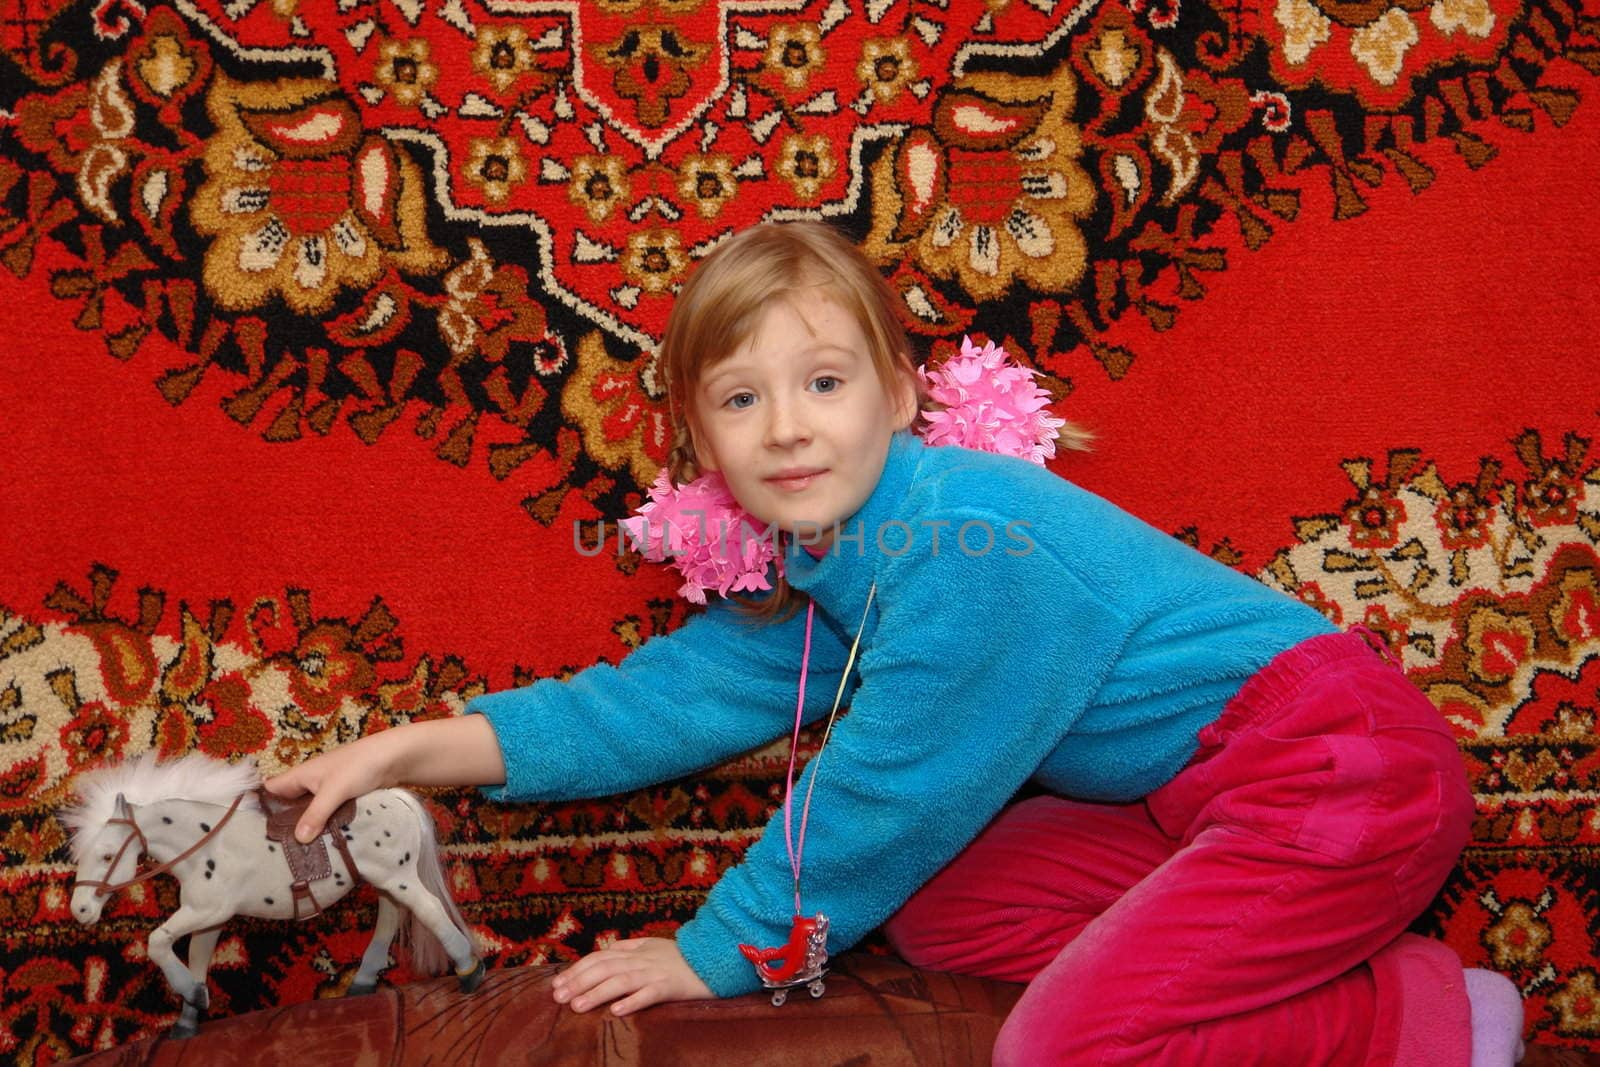 The girl in a dark blue sweater on a red background